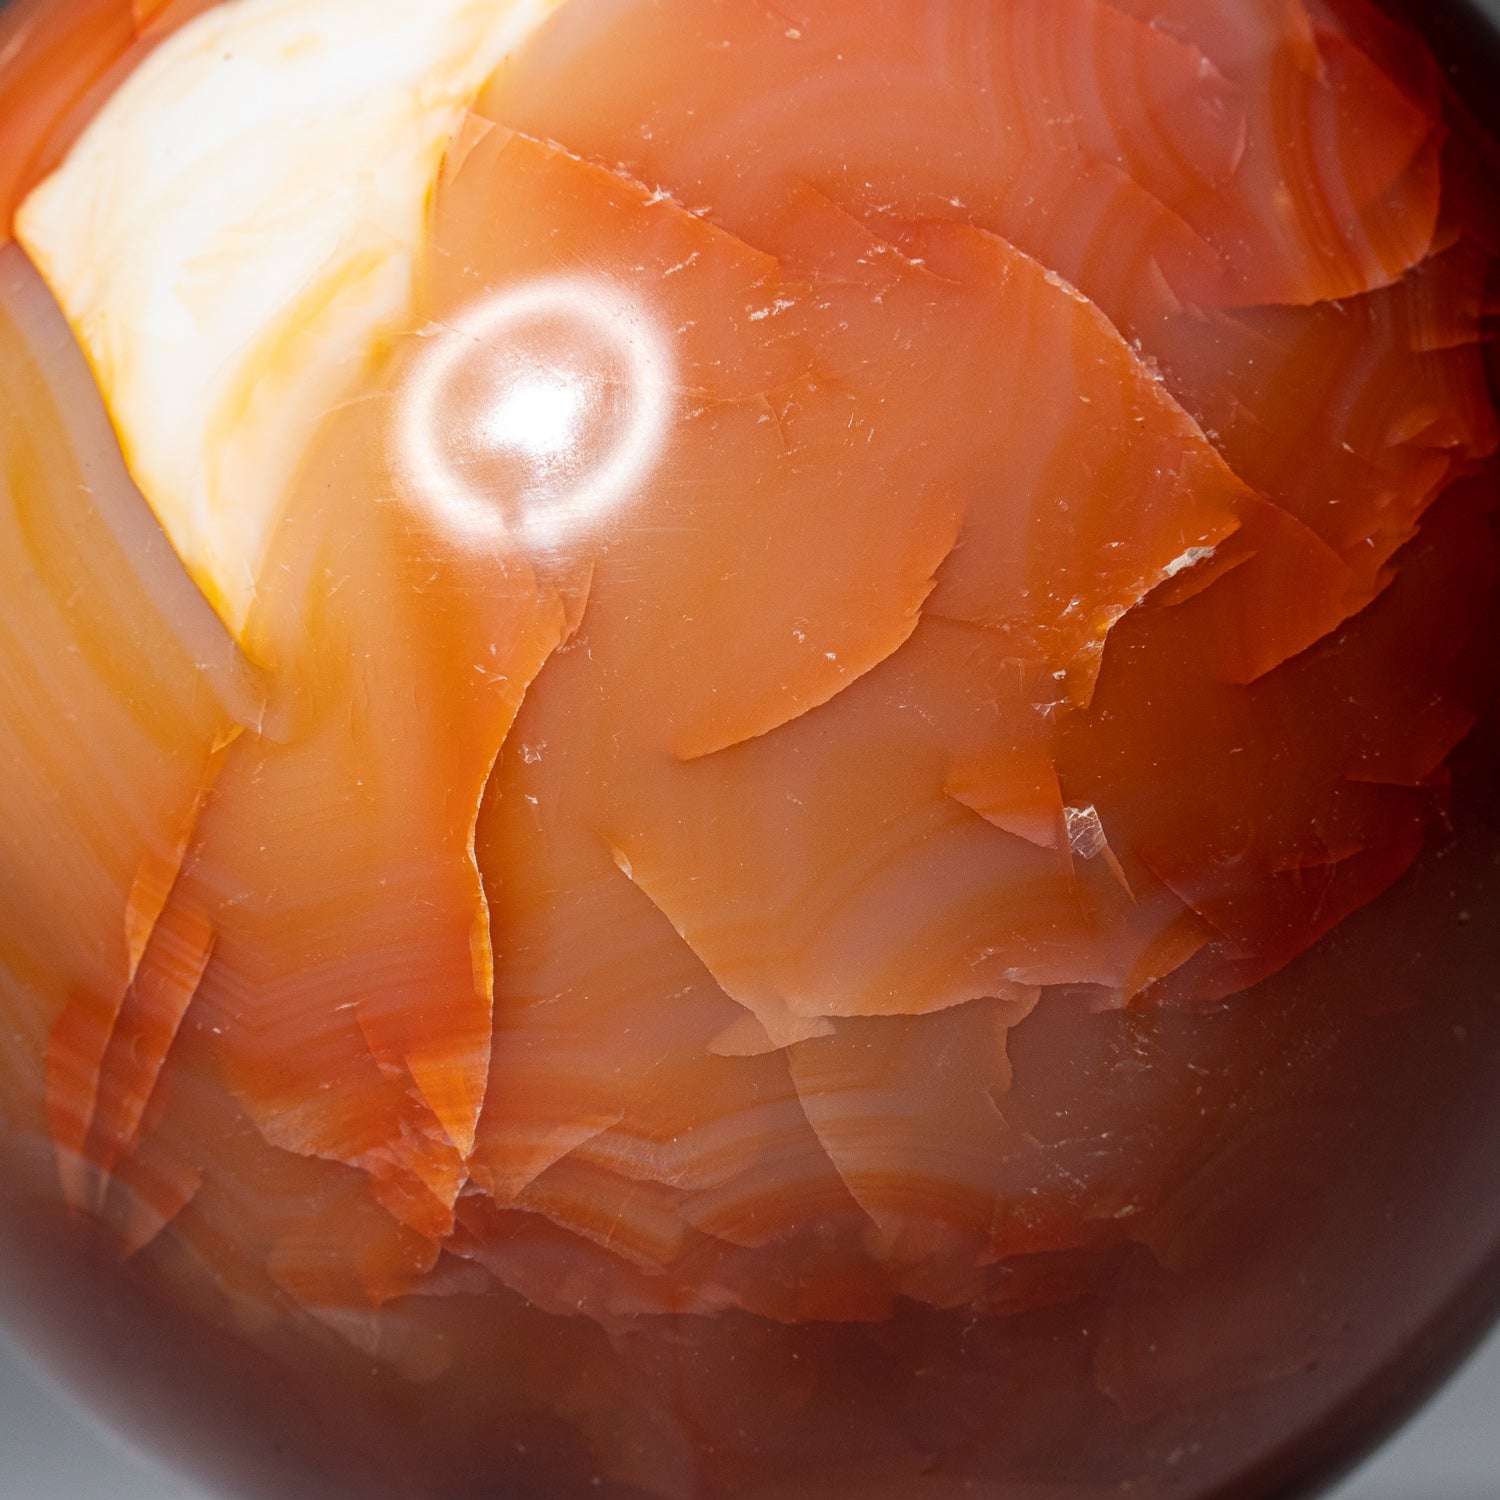 Polished Carnelian Agate (2.5") Sphere from Madagascar